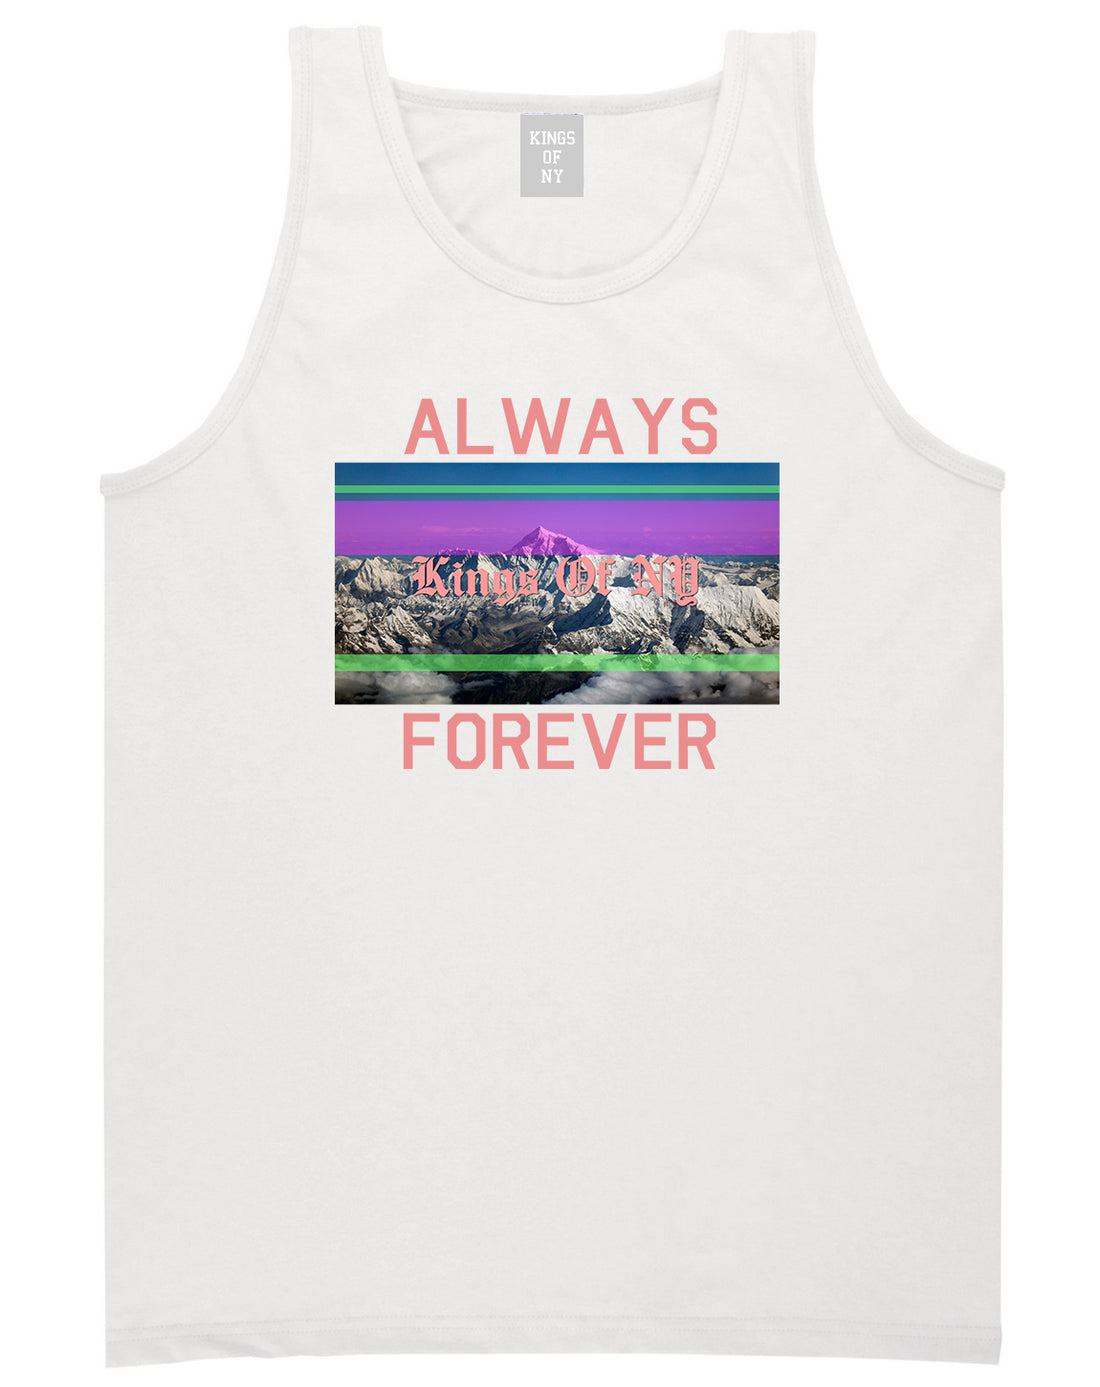 Mountains Always And Forever Mens Tank Top Shirt White by Kings Of NY